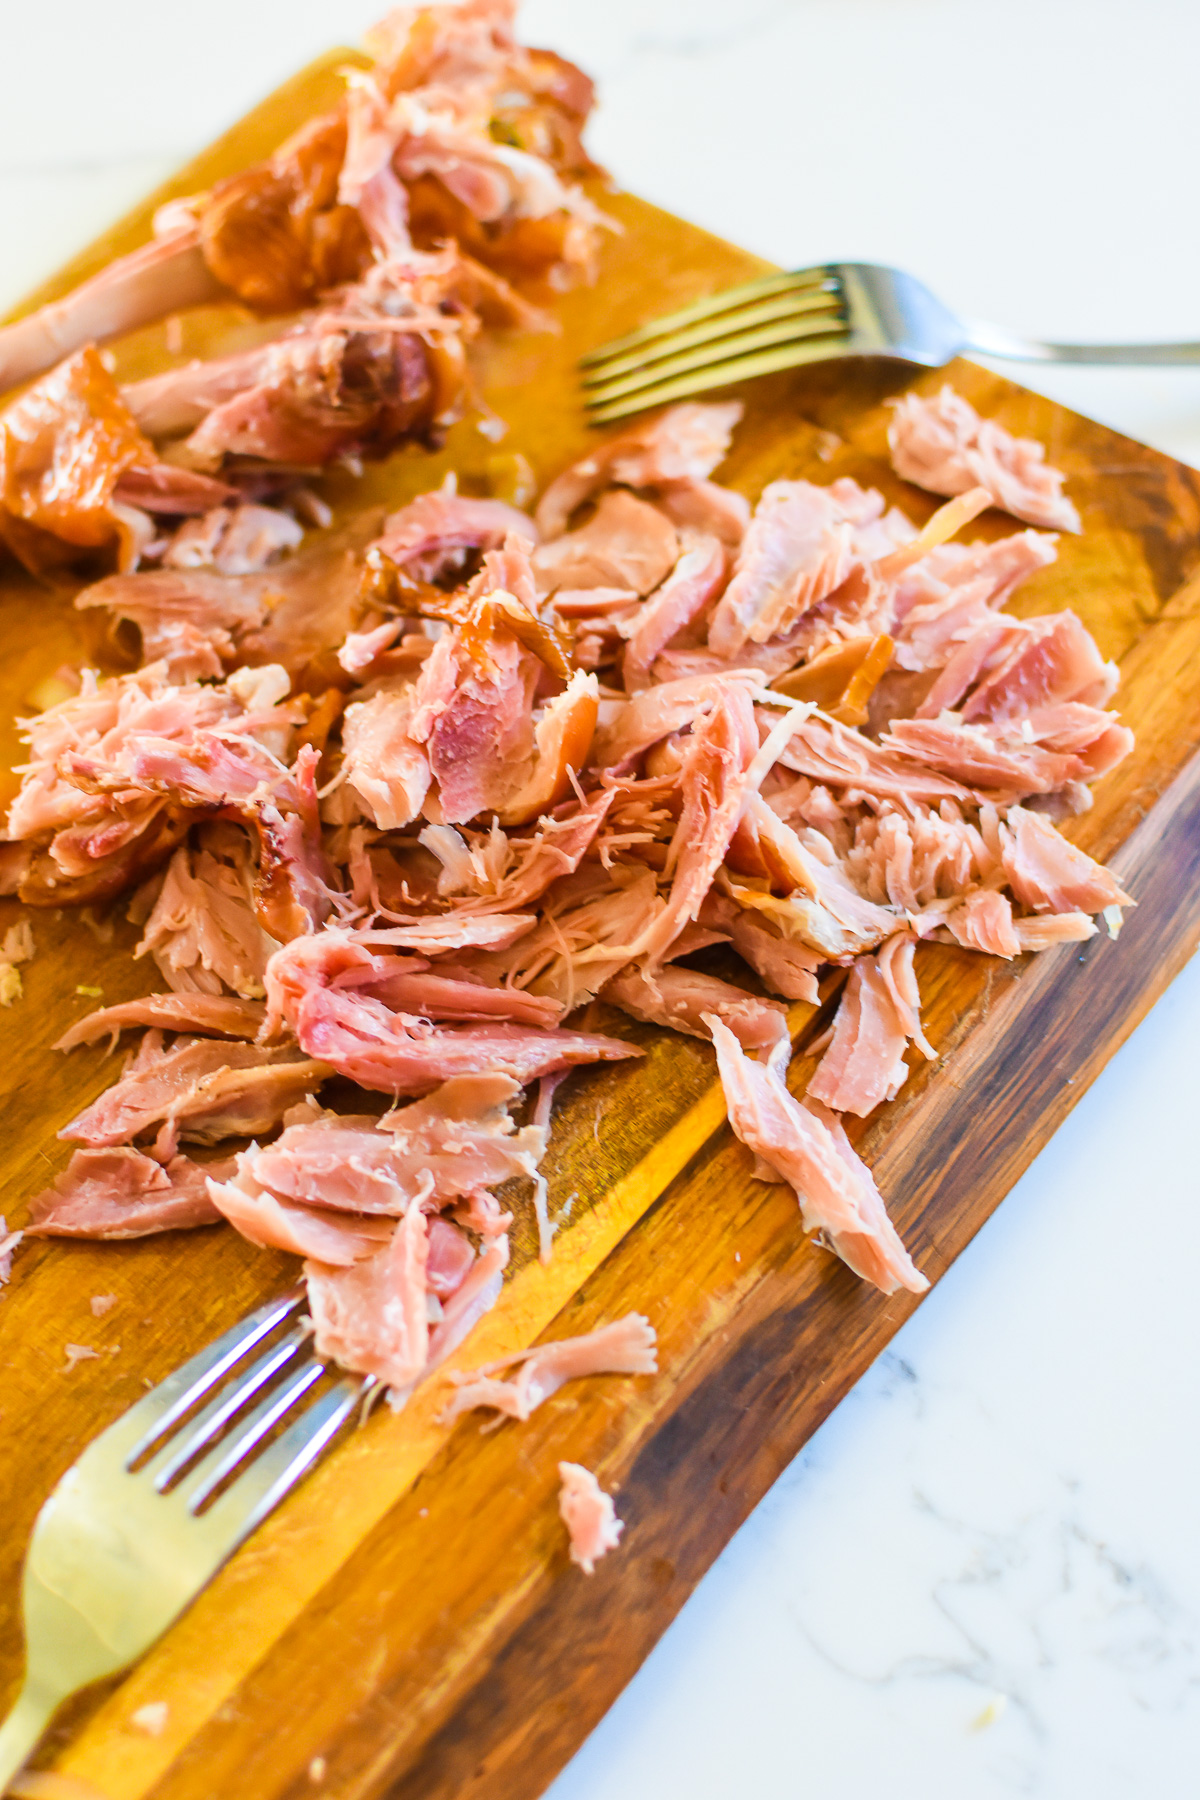 smoked turkey drum meat shredded from the bone on a wooden cutting board next to two forks.